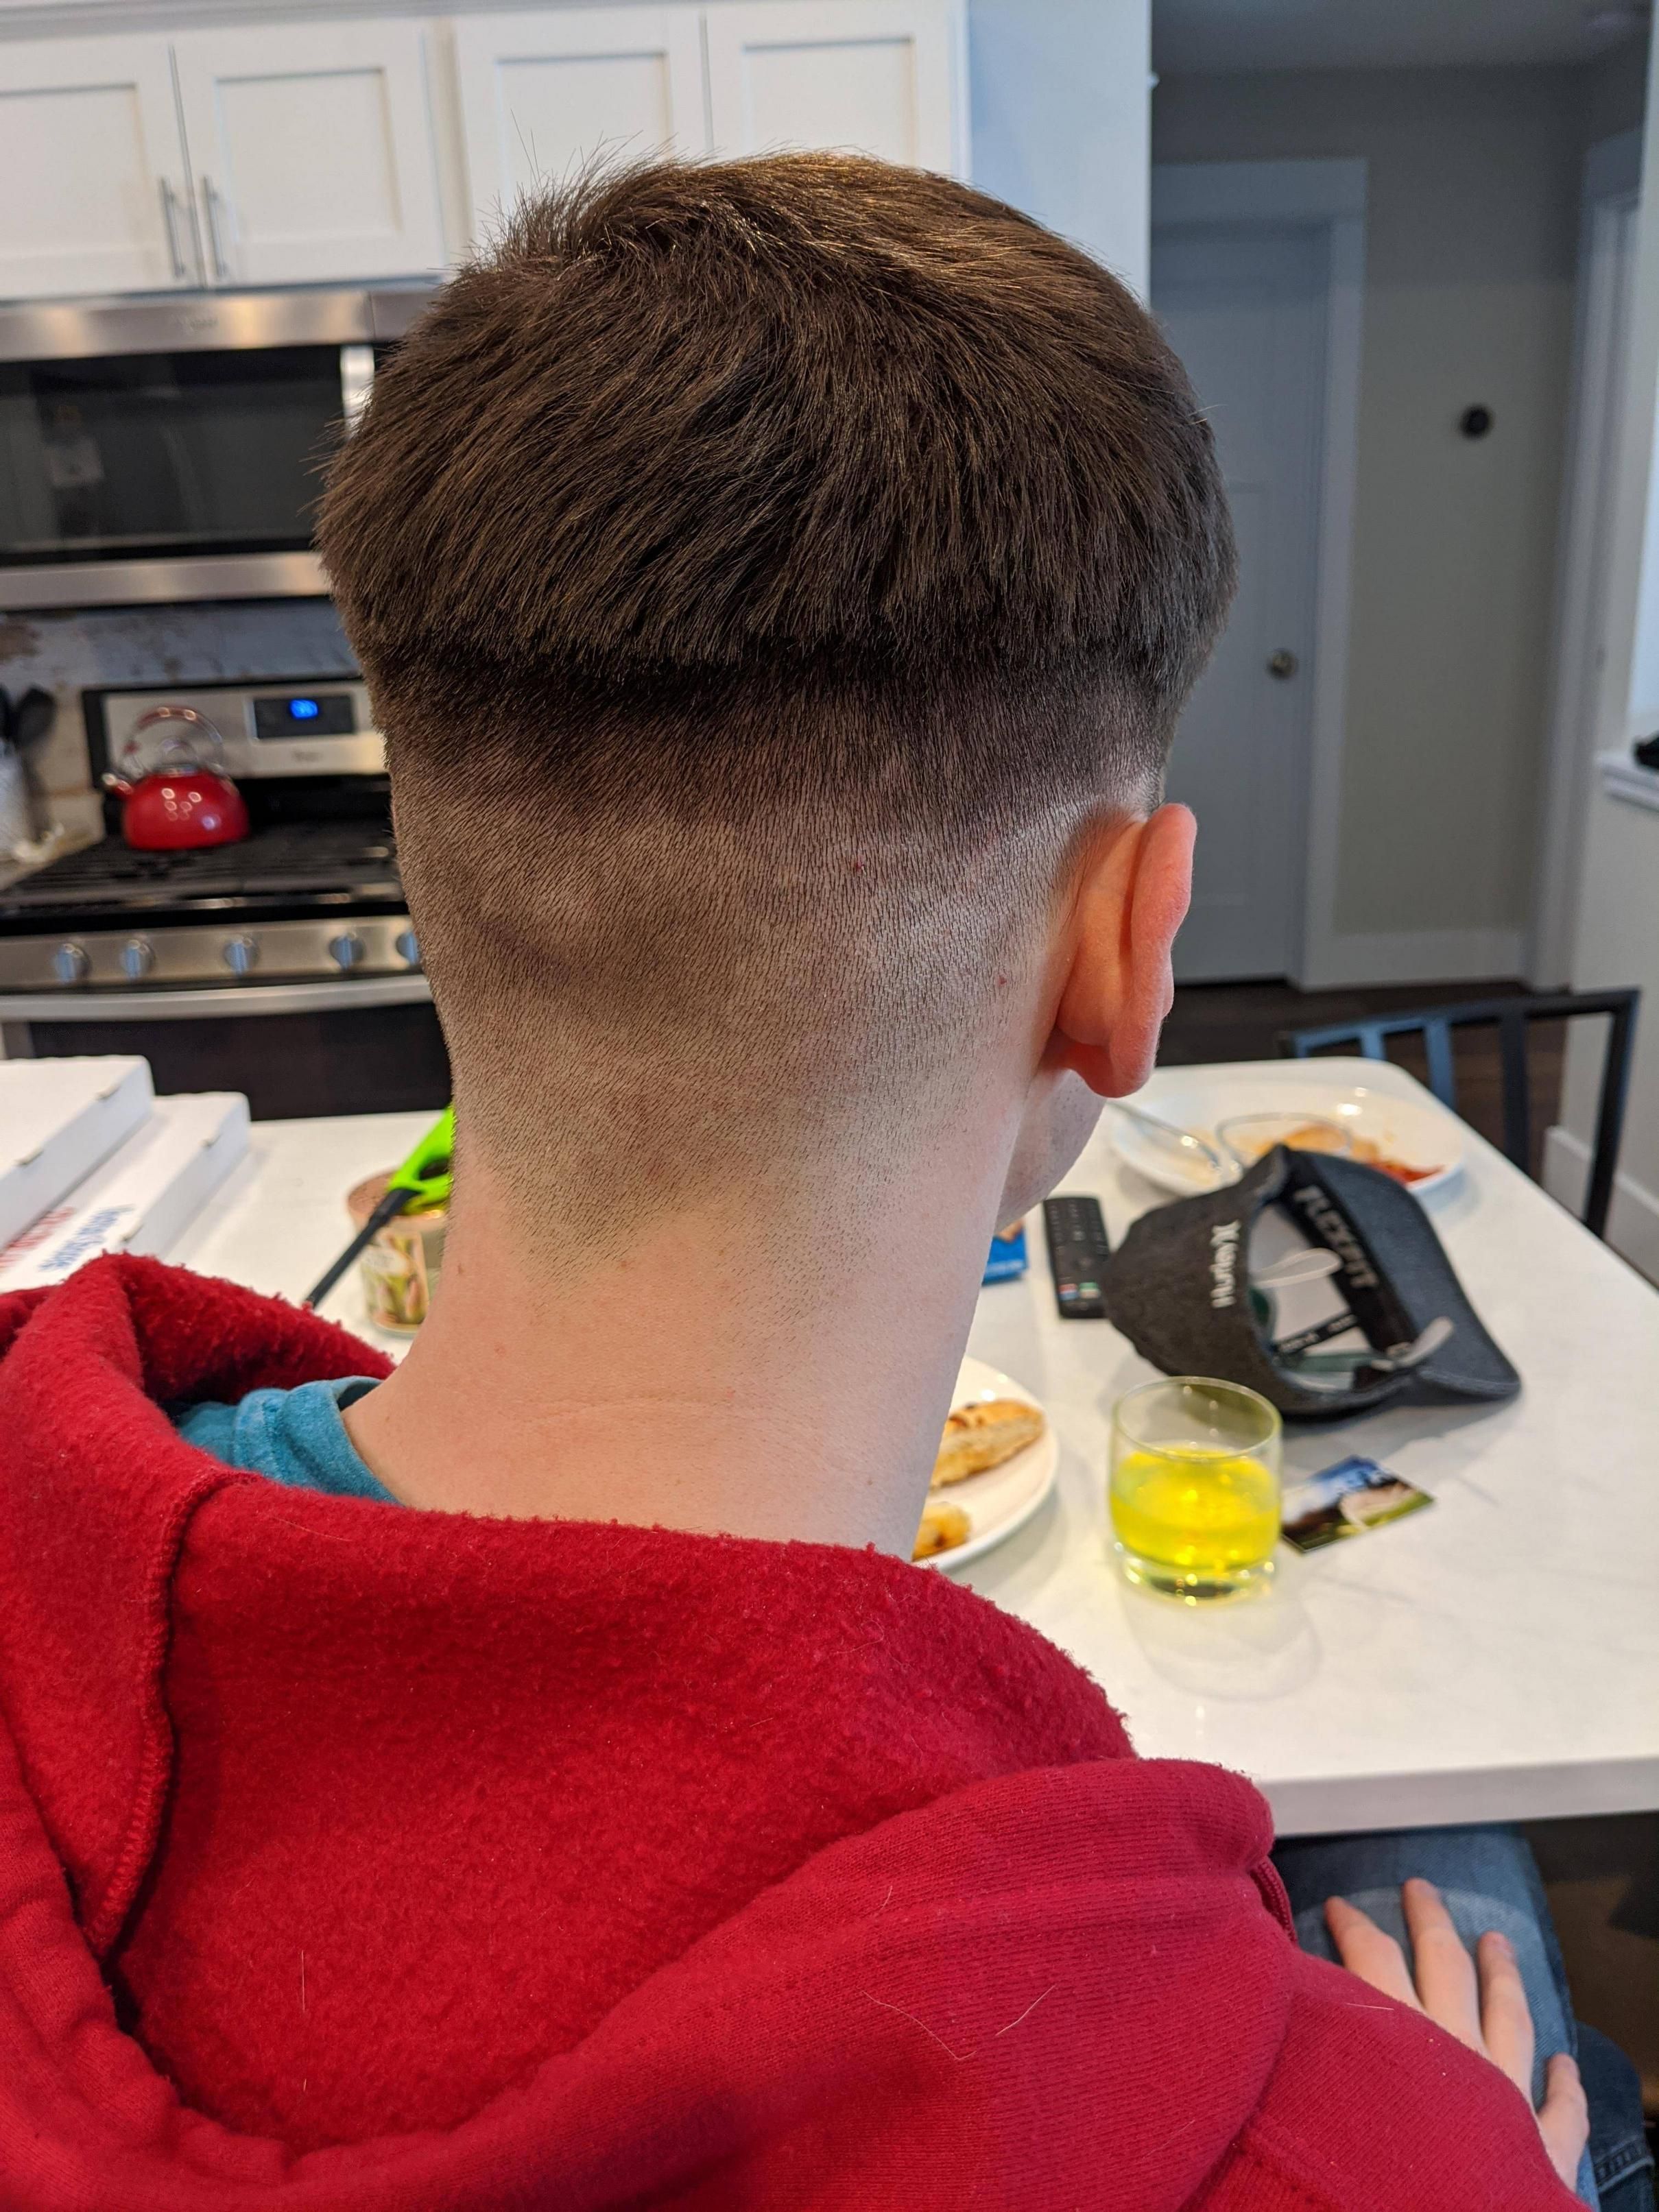 If your buddy says he can definitely do a fade, don't listen. Source: me